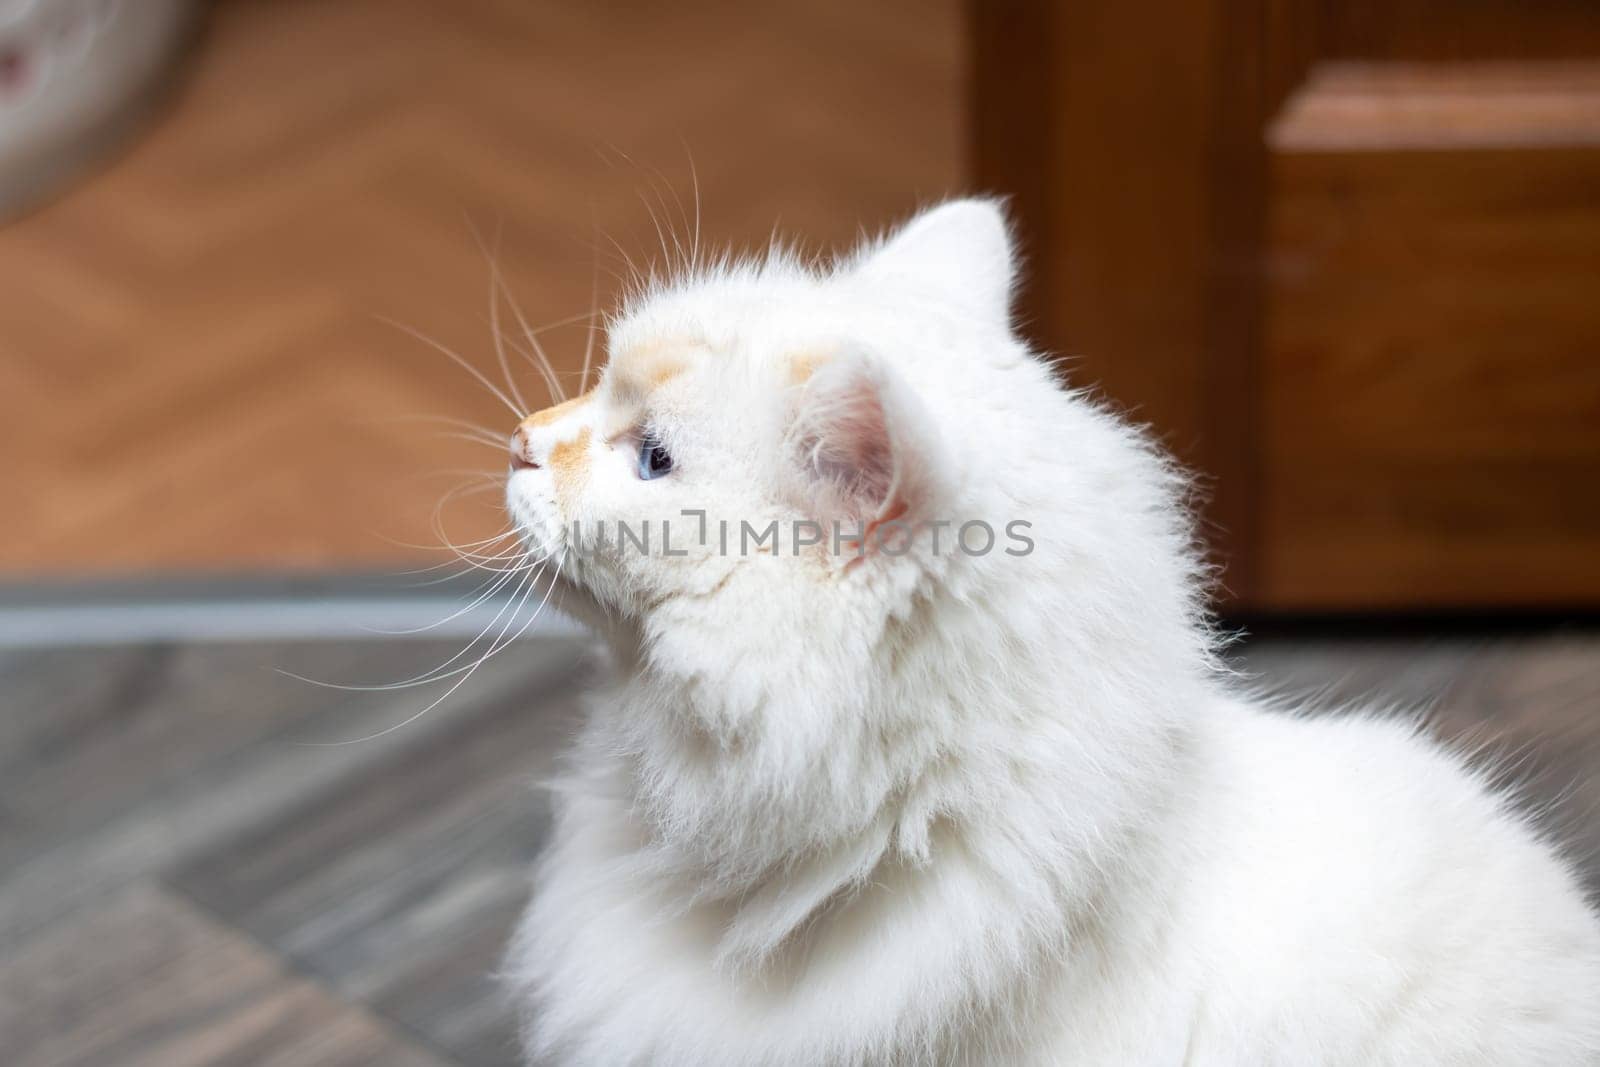 A closeup of a small to mediumsized Felidae cat with blue iris eyes, white fur, whiskers and fawn snout, staring out a window